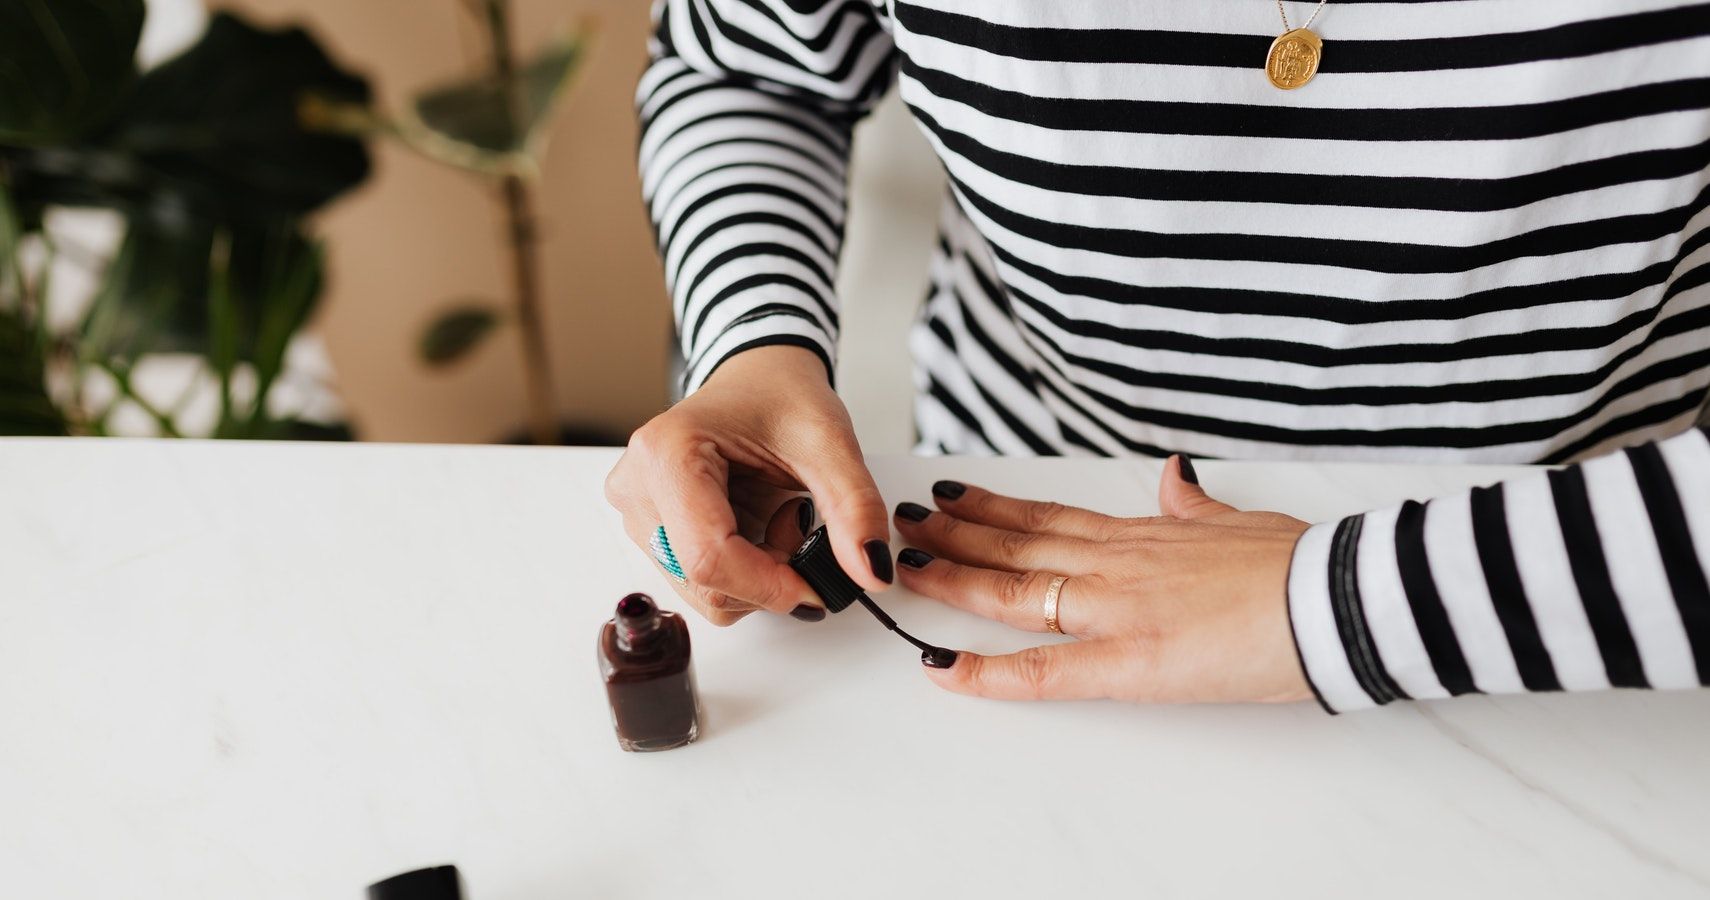 1. "Pregnancy-Safe Nail Polish: 10 Brands to Try" - wide 2